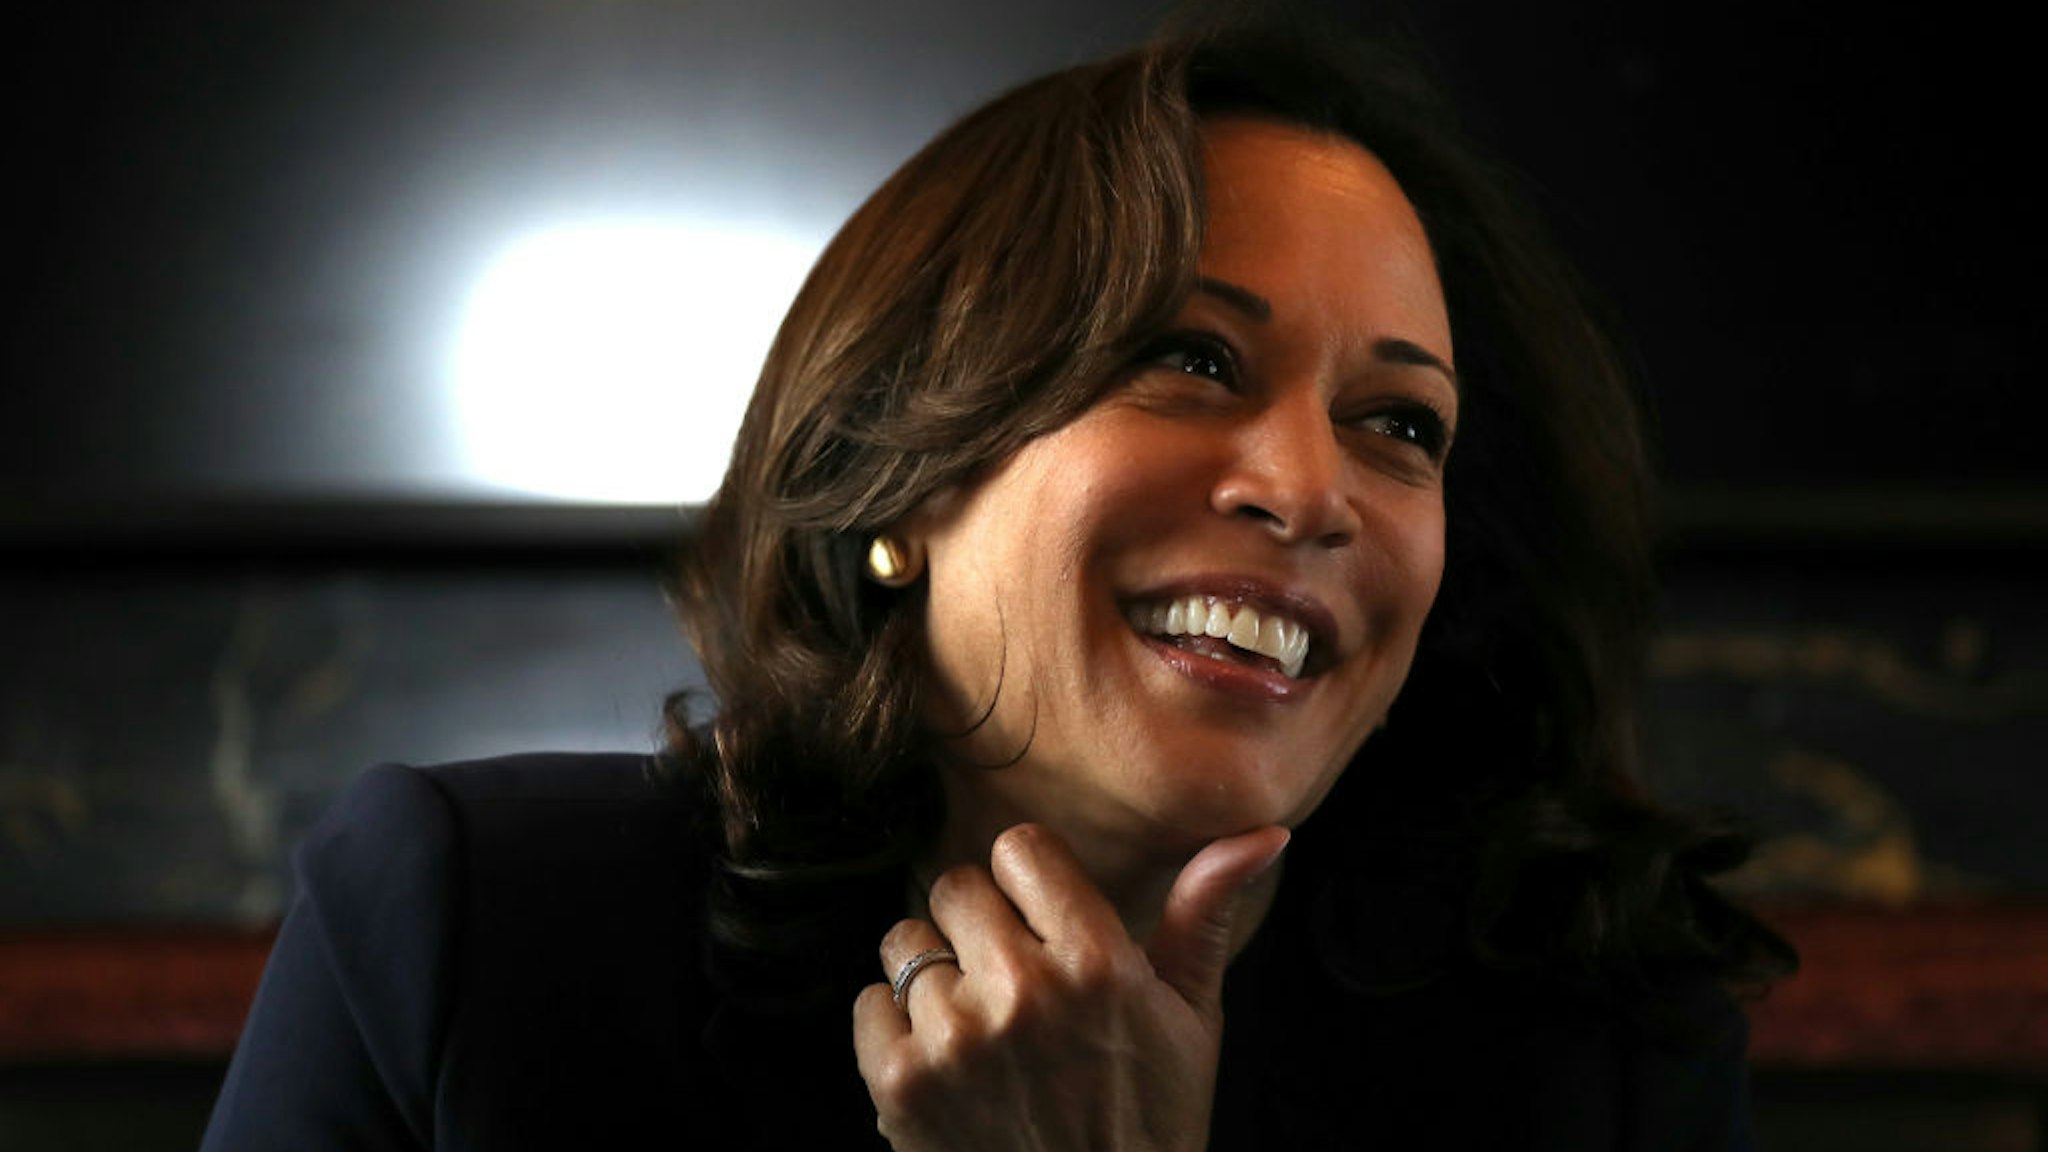 SIOUX CITY, IOWA - AUGUST 09: Democratic presidential hopeful U.S. Sen. Kamala Harris (C) (D-CA) rides on her campaign bus to a campaign event in Storm Lake on August 09, 2019 in Sioux City, Iowa. Kamala Harris is on a five day river-to-river bus tour across Iowa promoting her "3AM Agenda" to Iowans. (Photo by Justin Sullivan/Getty Images)